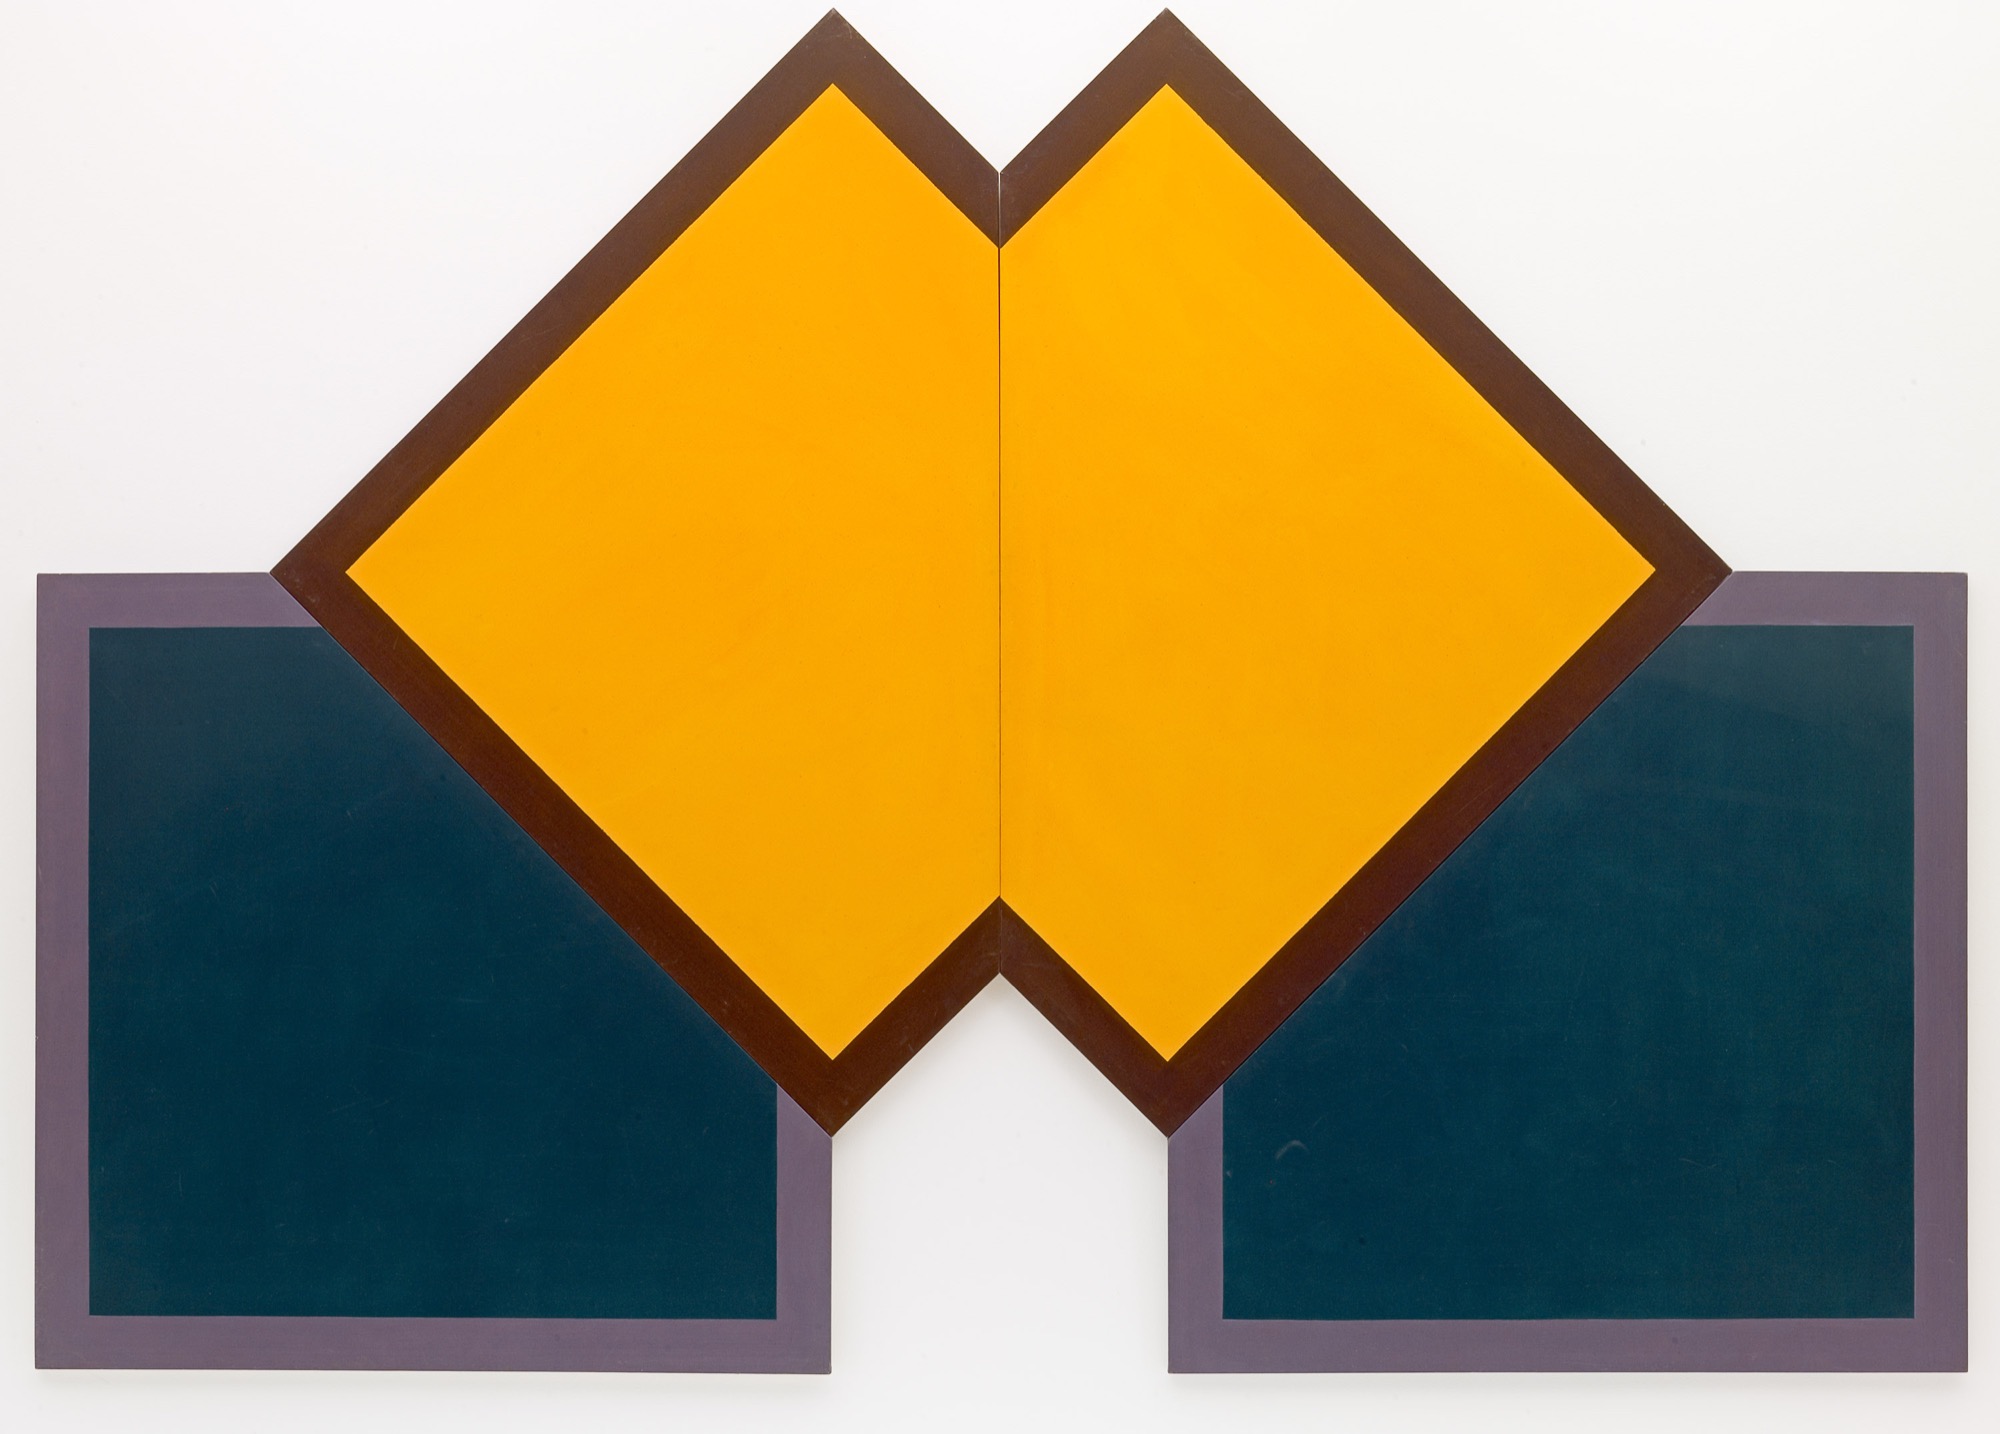 Tony McGillick, <em>Arbitrator</em>, 1968, synthetic polymer paint on canvas. 287.0 x 406.0 cm irreg. (overall). Queensland Art Gallery, Brisbane. Purchased 2007 with funds from the Estate of Vincent Stack through the Queensland Art Gallery Foundation.